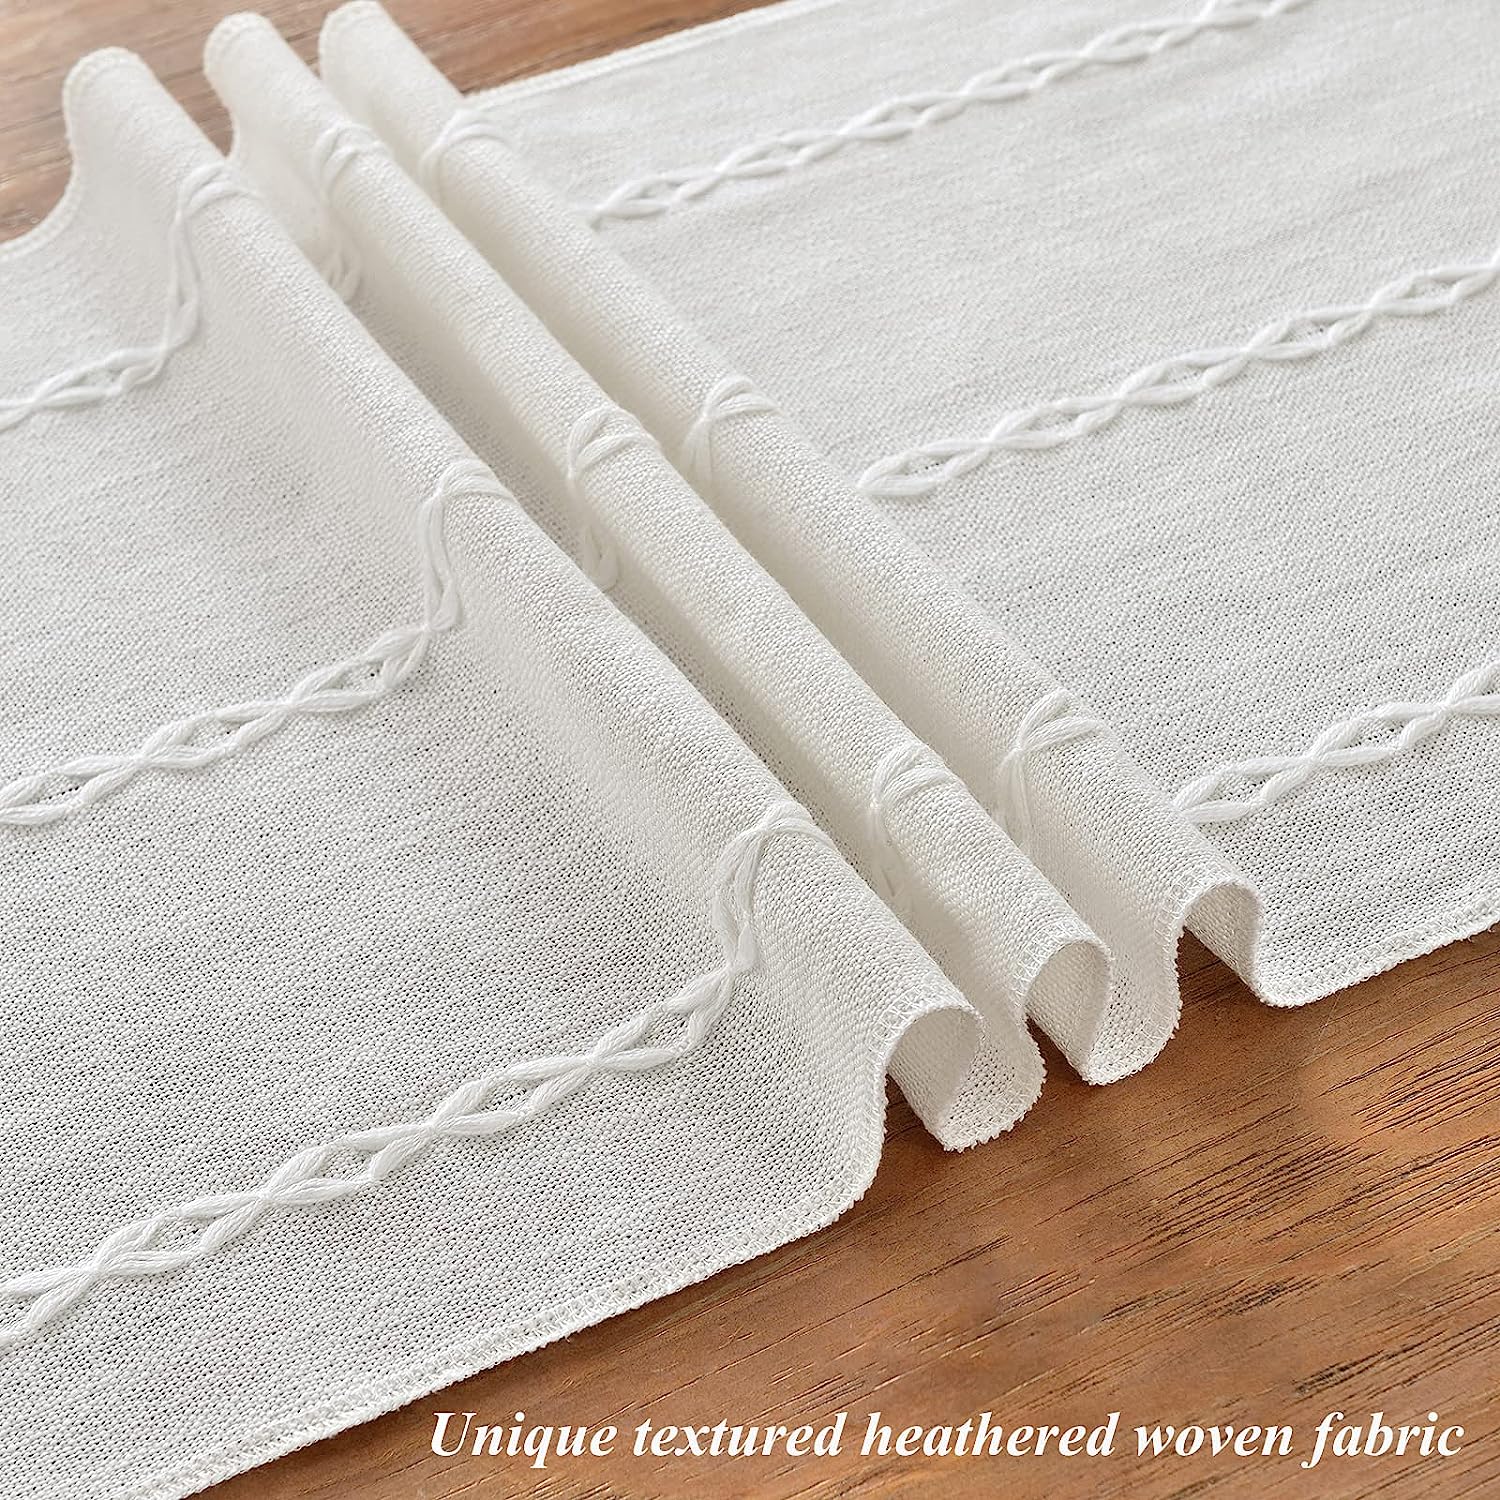 Wracra Cotton Linen Table Runner Farmhouse Style White Table Runner 180cm with Hand-tassels for Party, Dining Room Decorations Dessert Table Decor(White, 180cm) 3